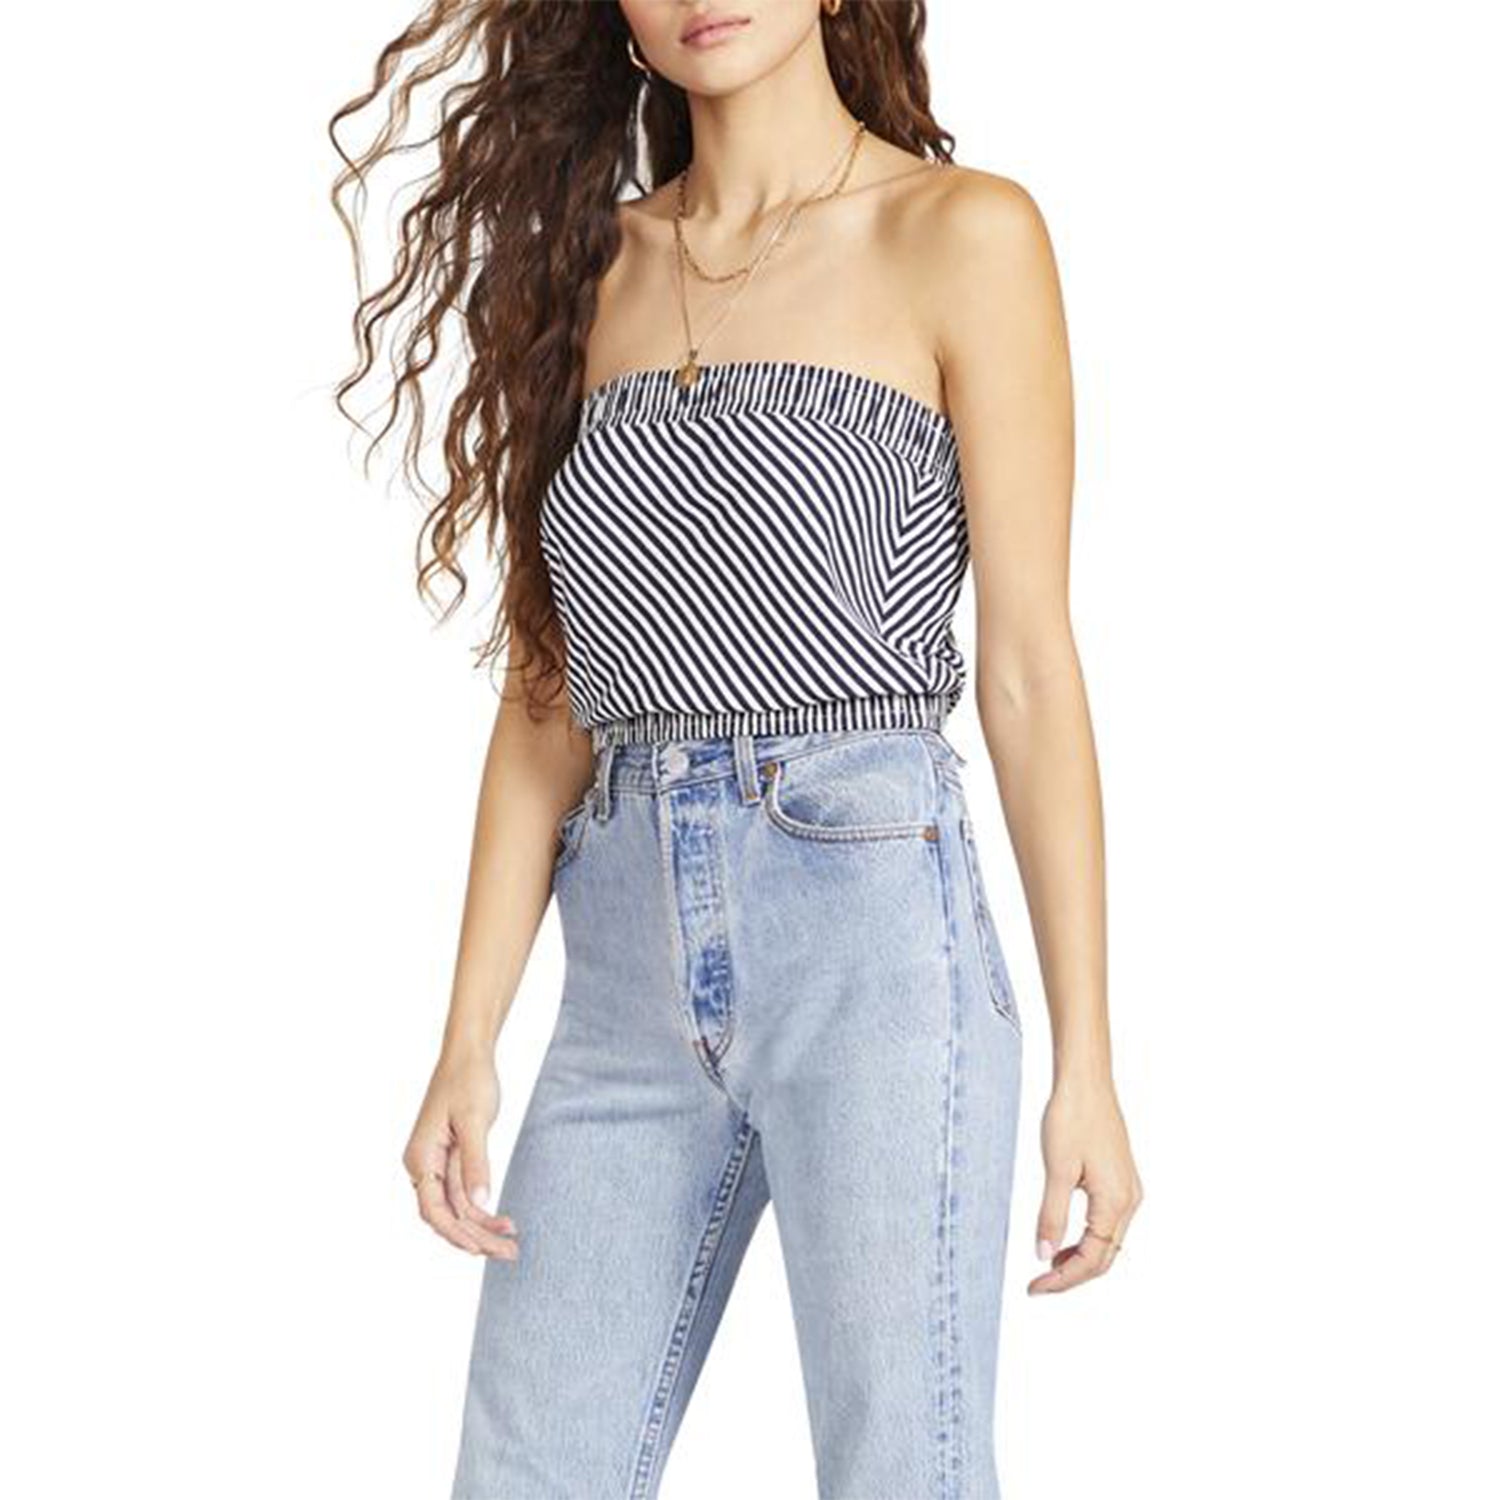 BB Dakota Find My Way Top. Give your everyday look a fun update with this cute piece! Featuring a striped material, tube top style, elastic detail at the top and bottom hem, and  cropped length. Style this with a denim skirt and platform sandals fora look we are obsessing over. 